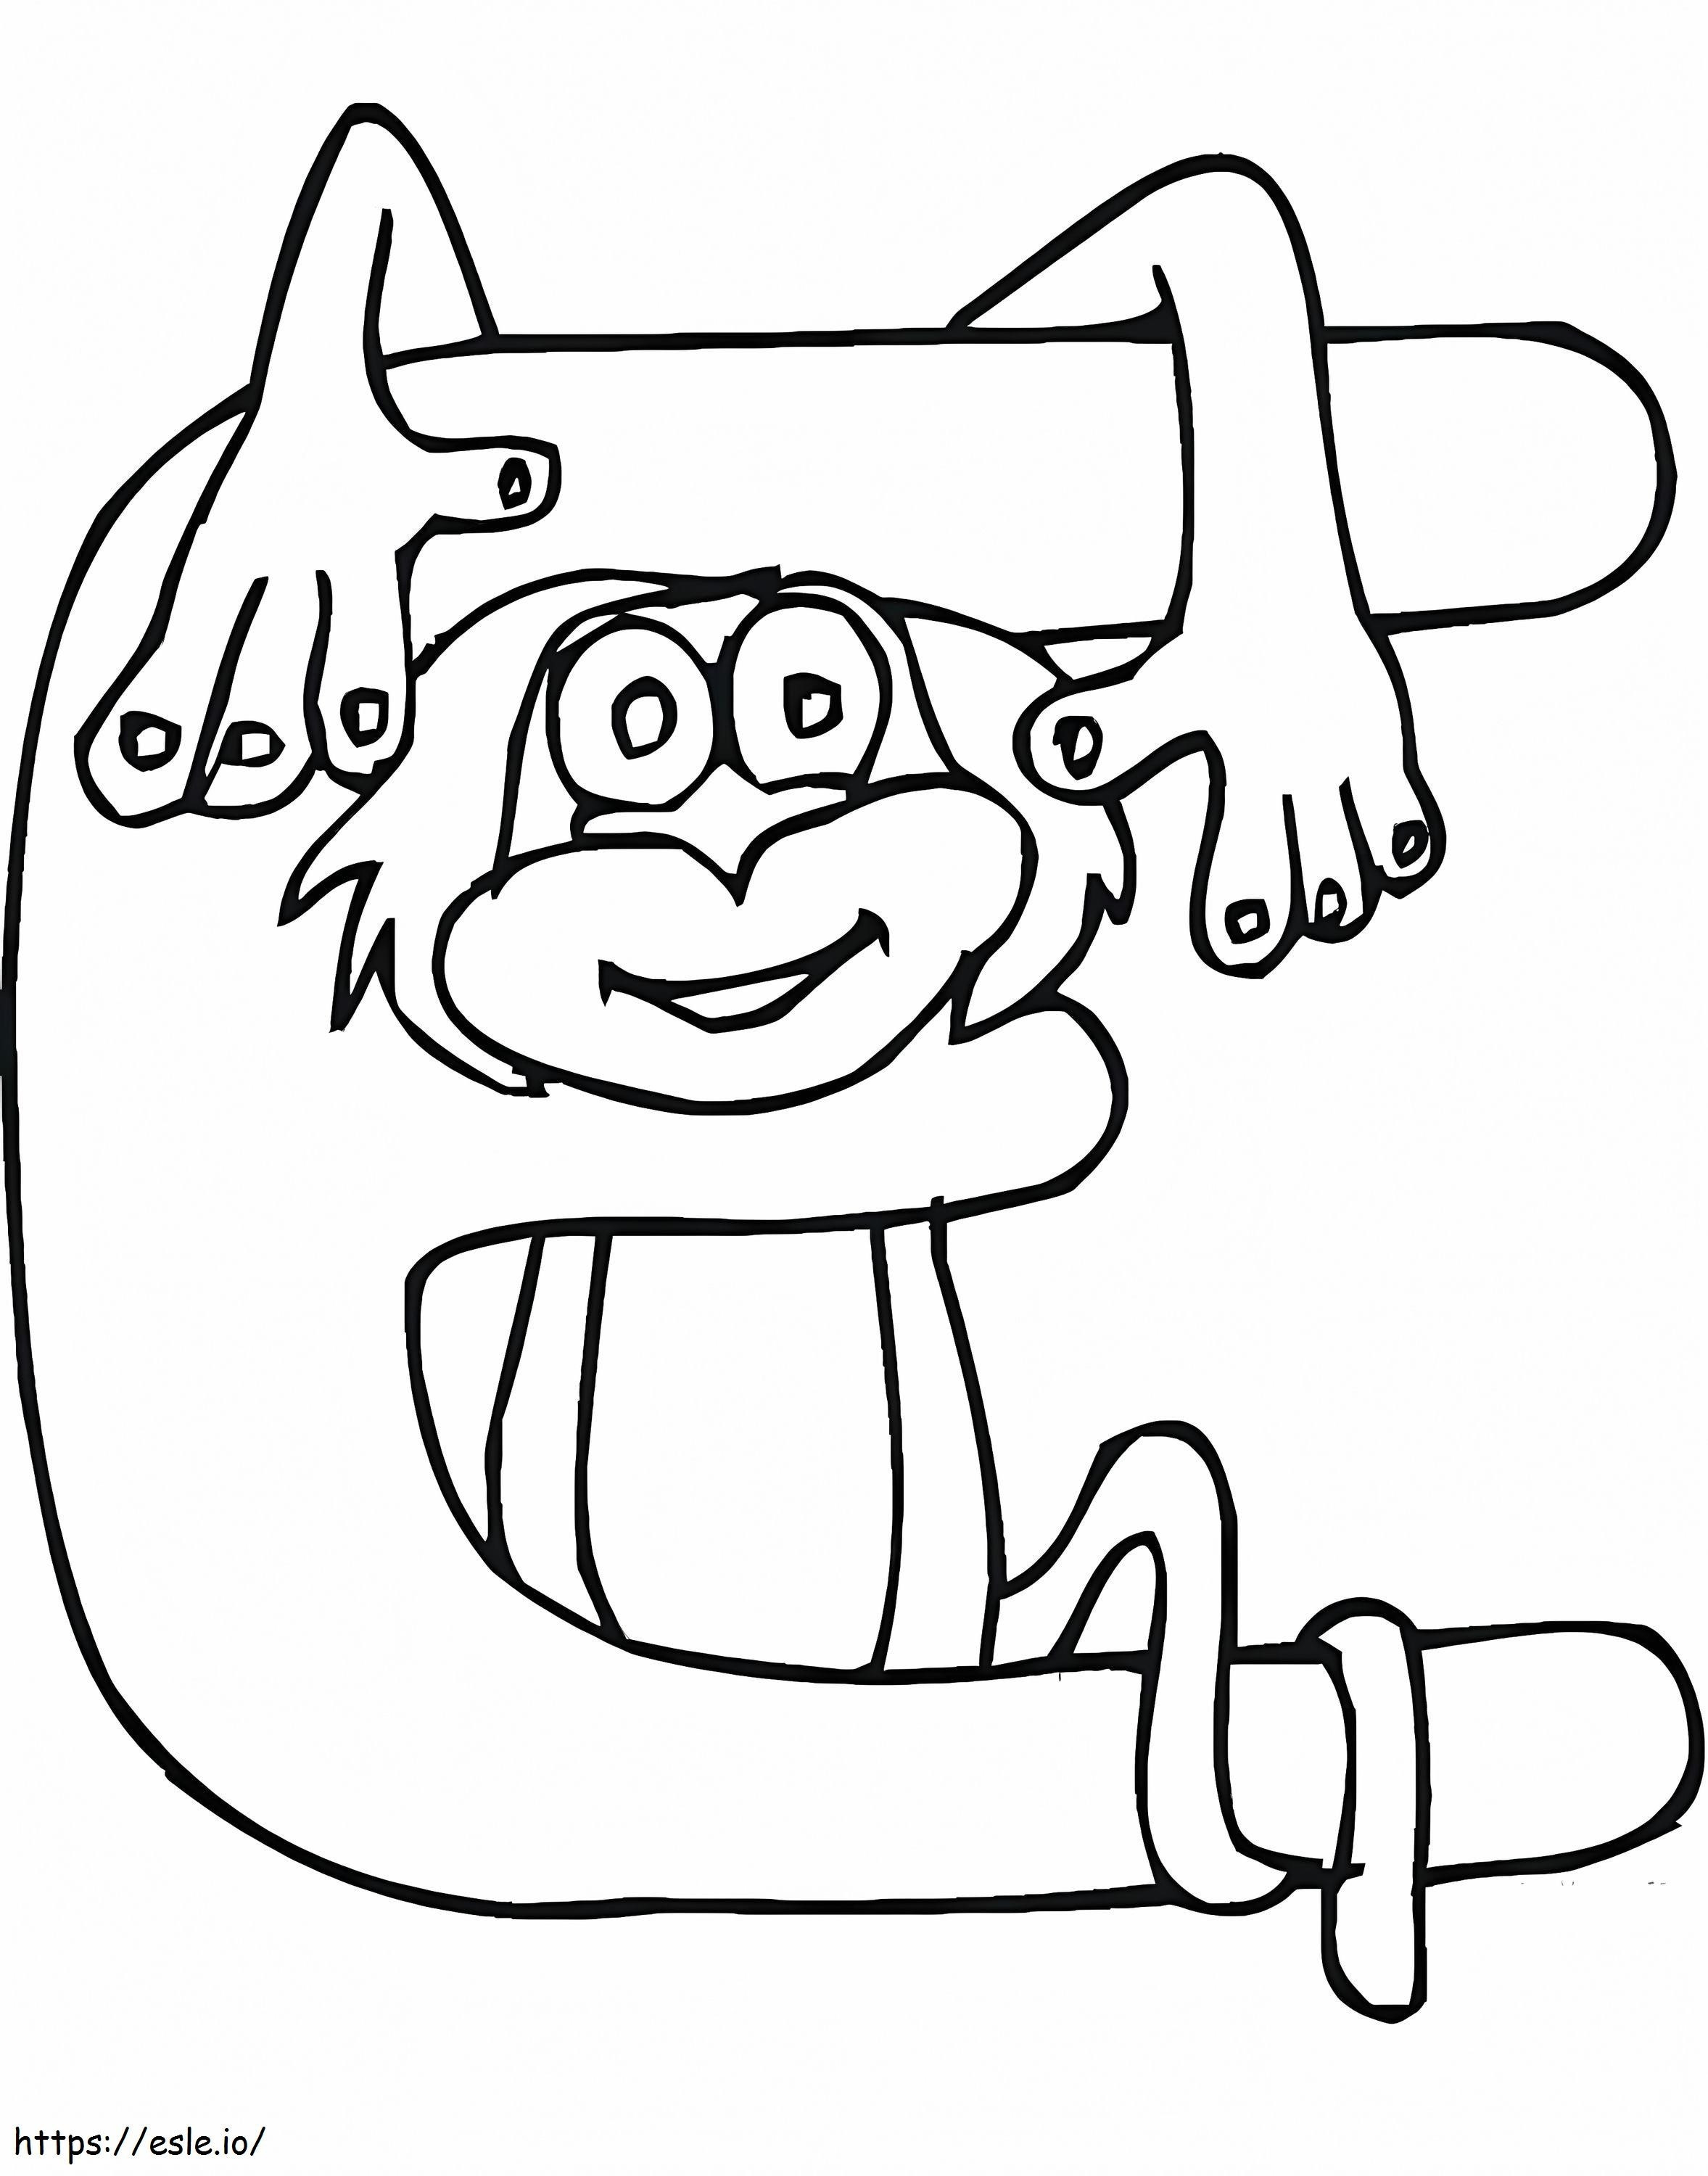 Letter E 3 coloring page